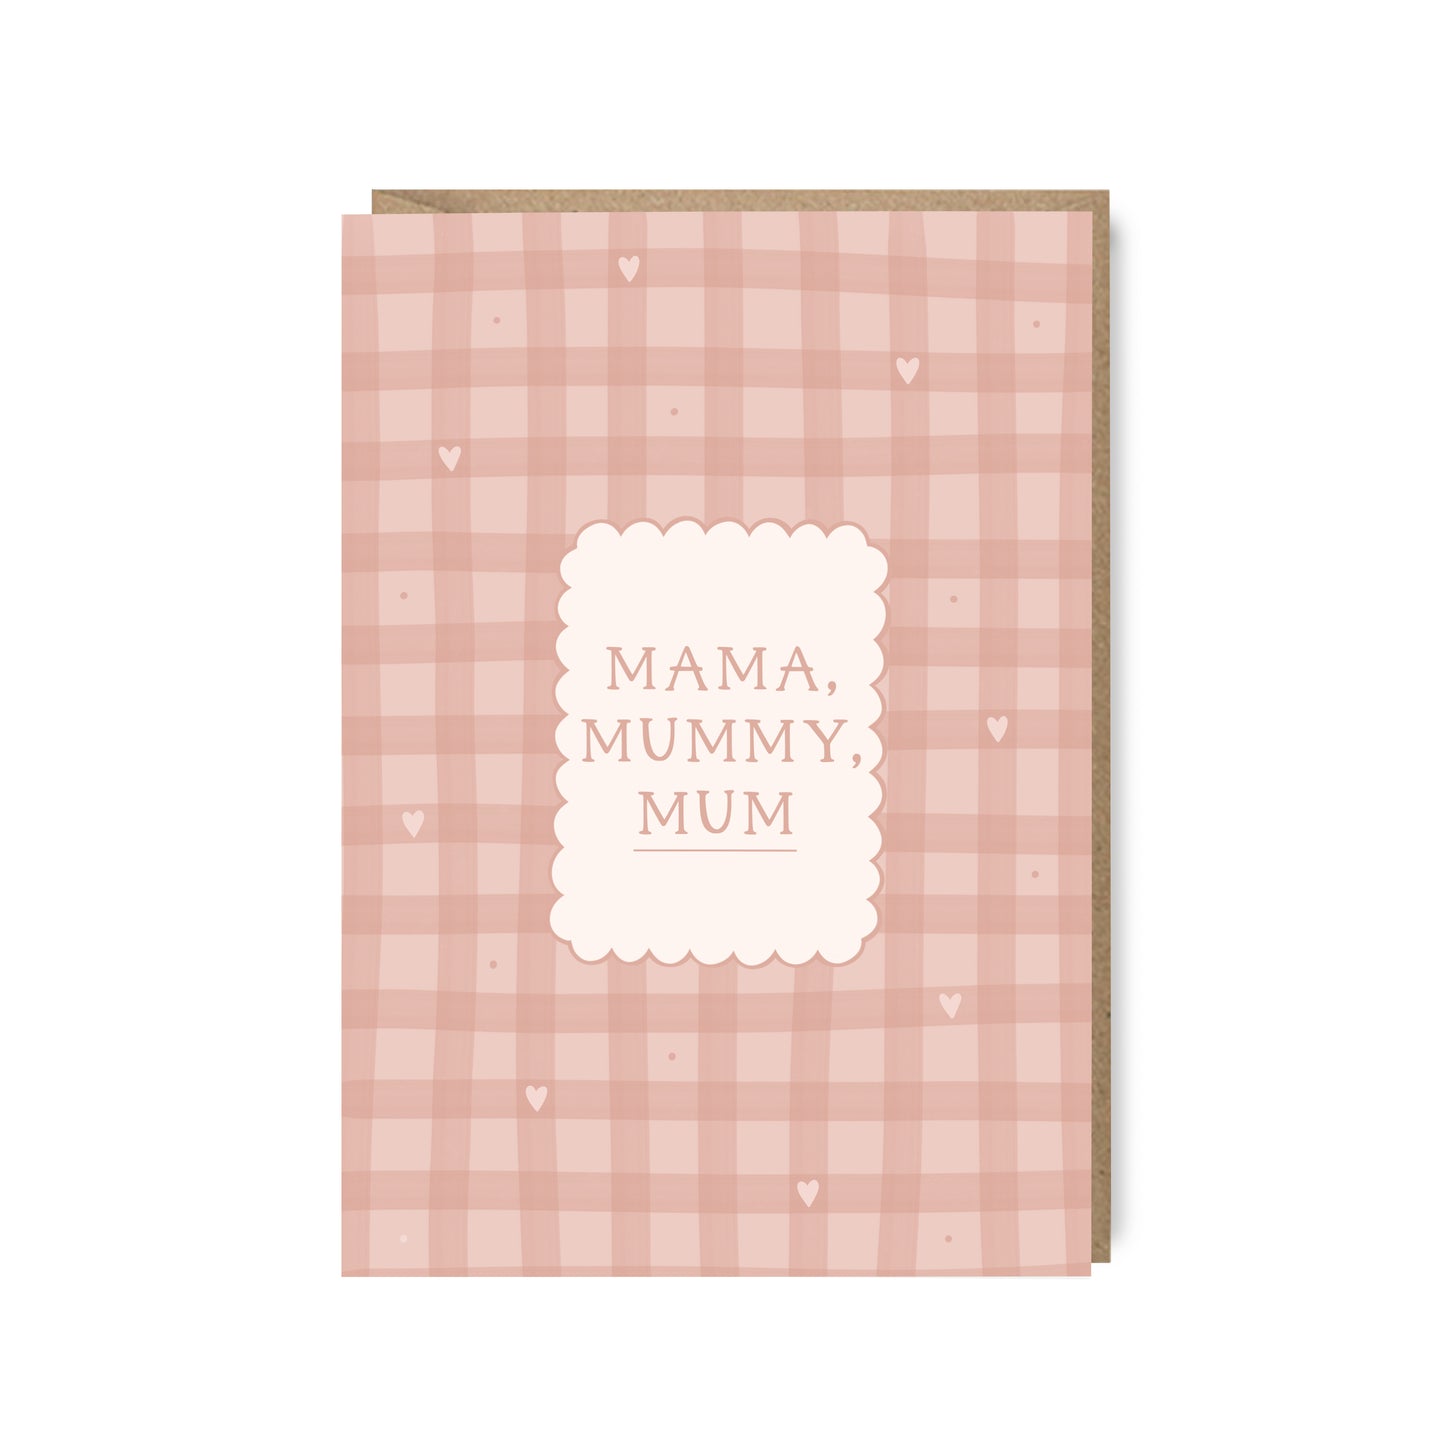 Mama, mummy, mum sentimental mother's day card with pink gingham pattern by abbie imagine